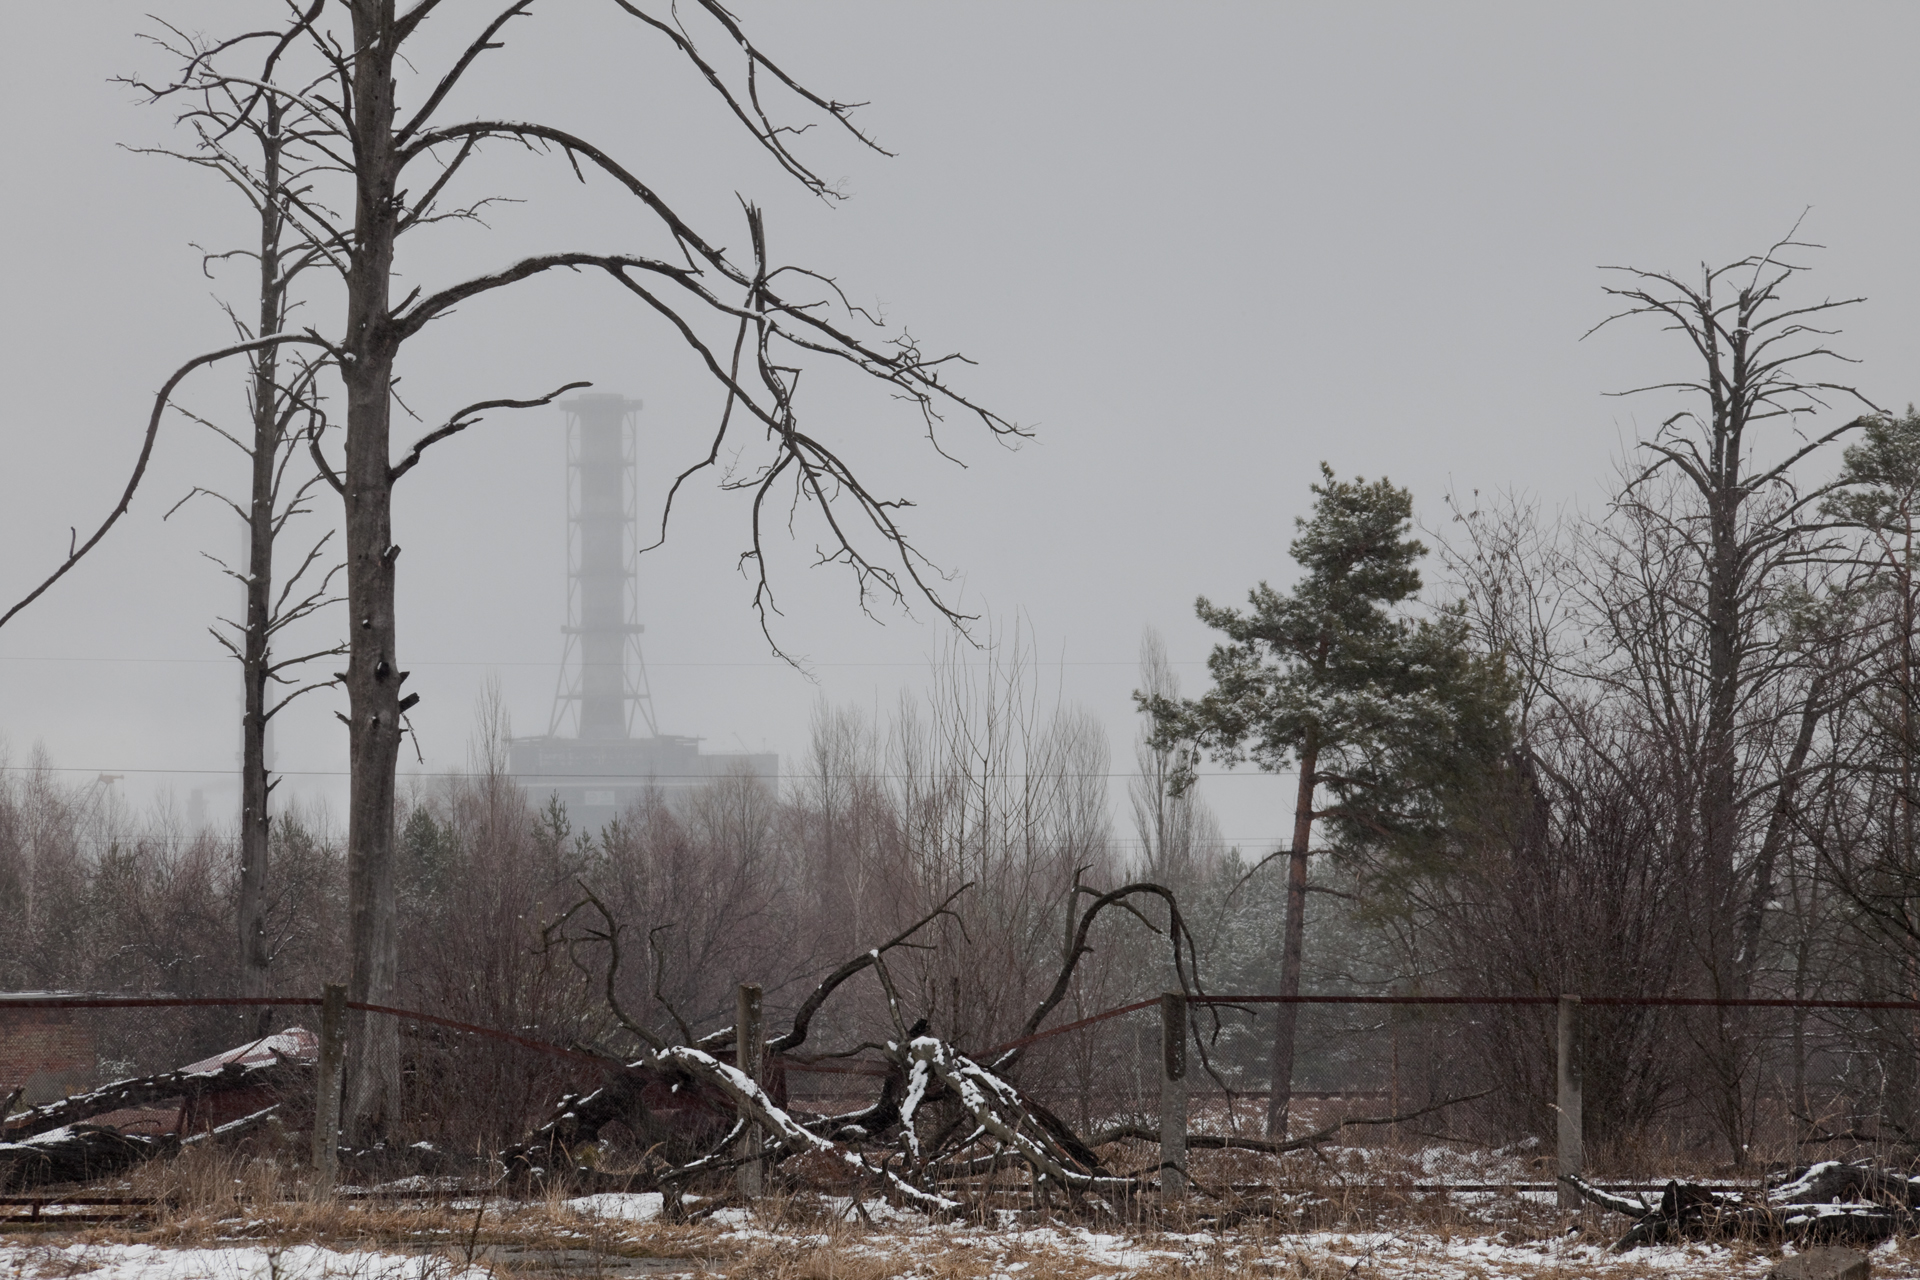  A view of the sarcophagus with remnants of the 10 square kilometer Red Forest surrounding the Chernobyl Nuclear Power Plant.  Chernobyl Nuclear Power Plant, Ukraine  